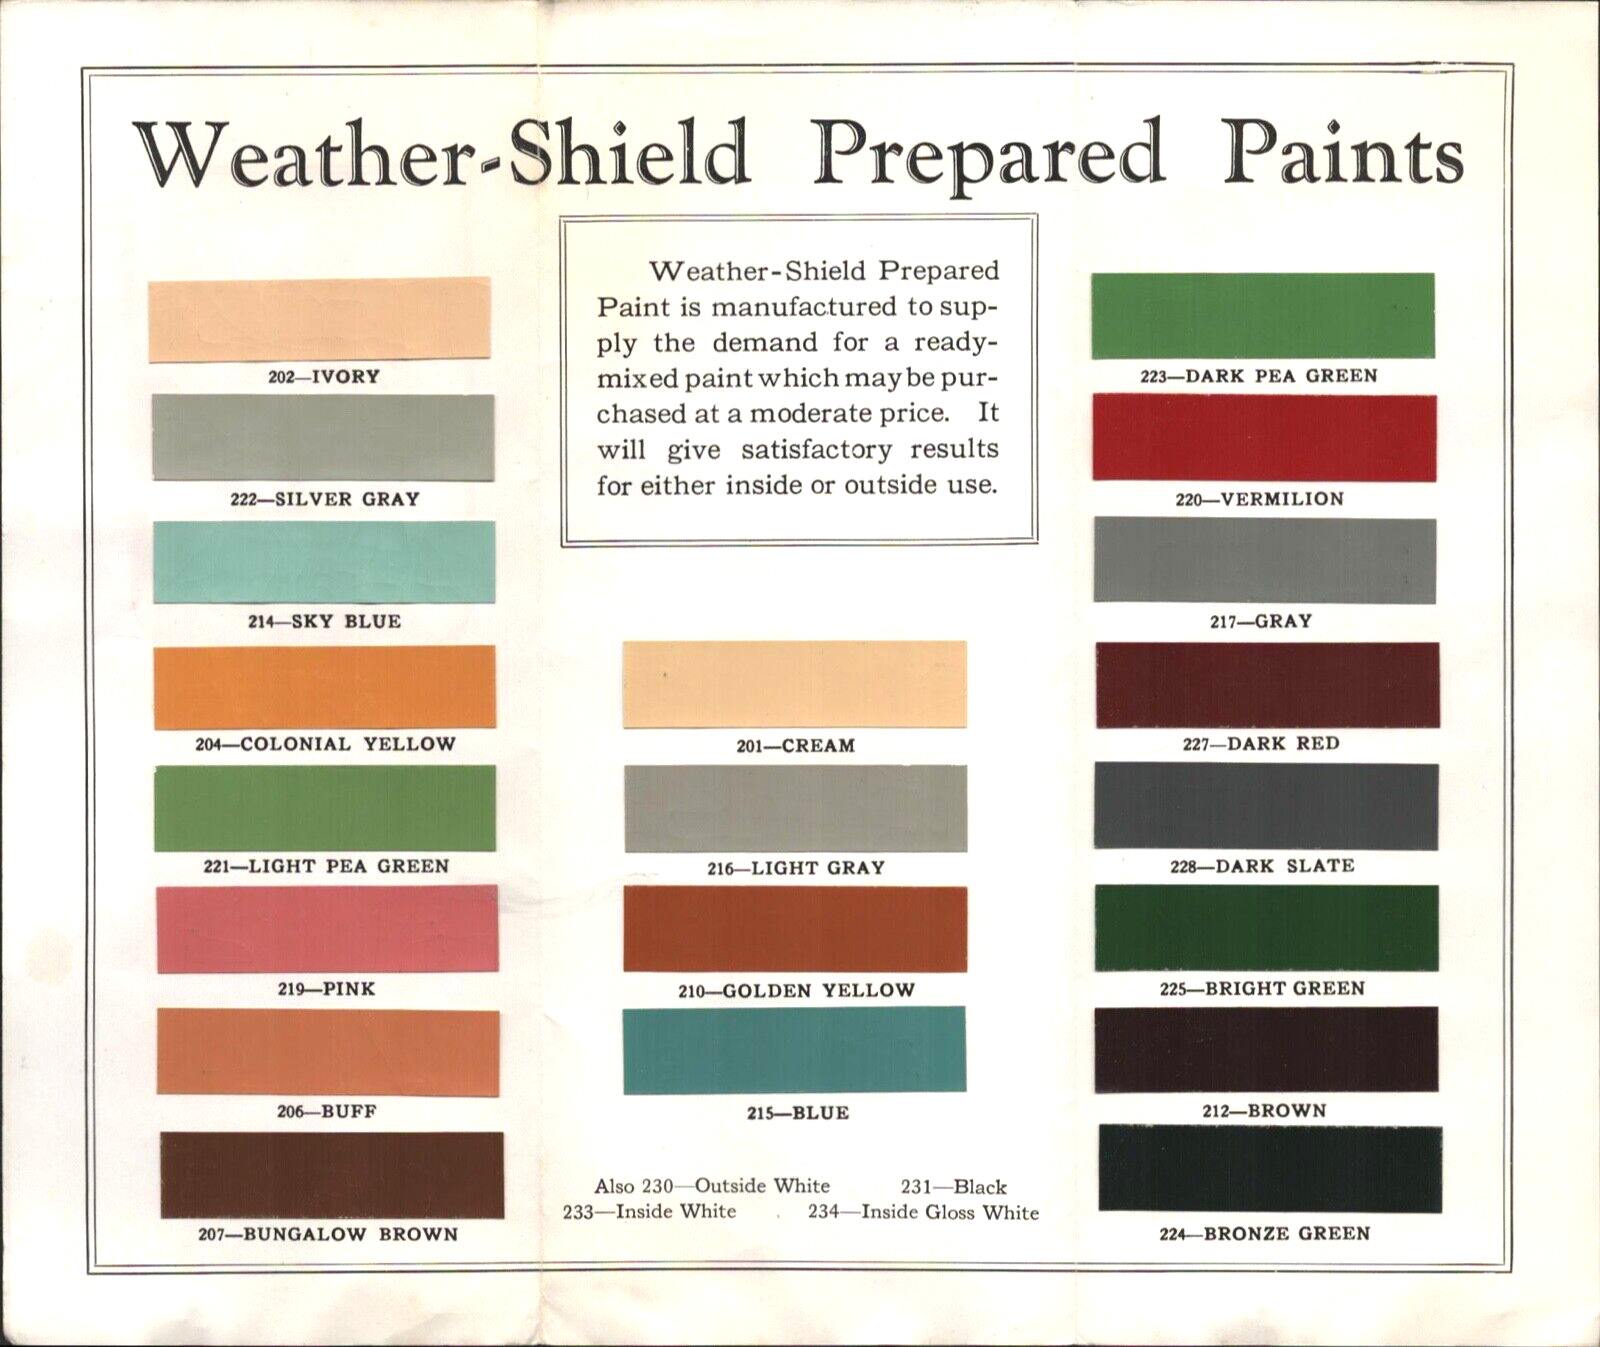 1931 WEATHER-SHIELD PAINT vintage painting advertising brochure COLOR SWATCHES